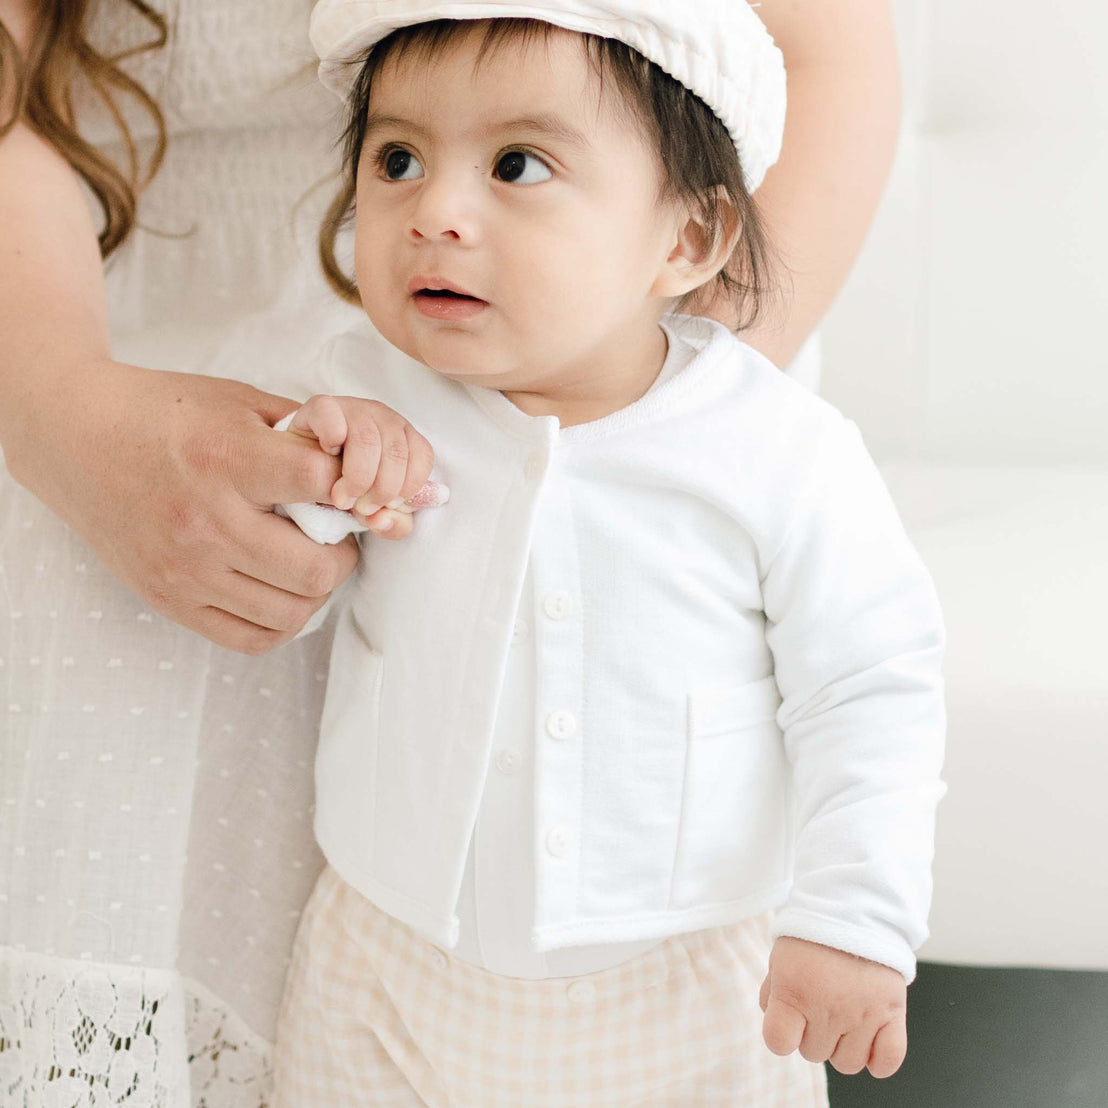 A mother holds the hand of her baby dressed in Ian Fawn Shorts Set. The baby, looking up with curiosity, has a white headband against a soft and light background.